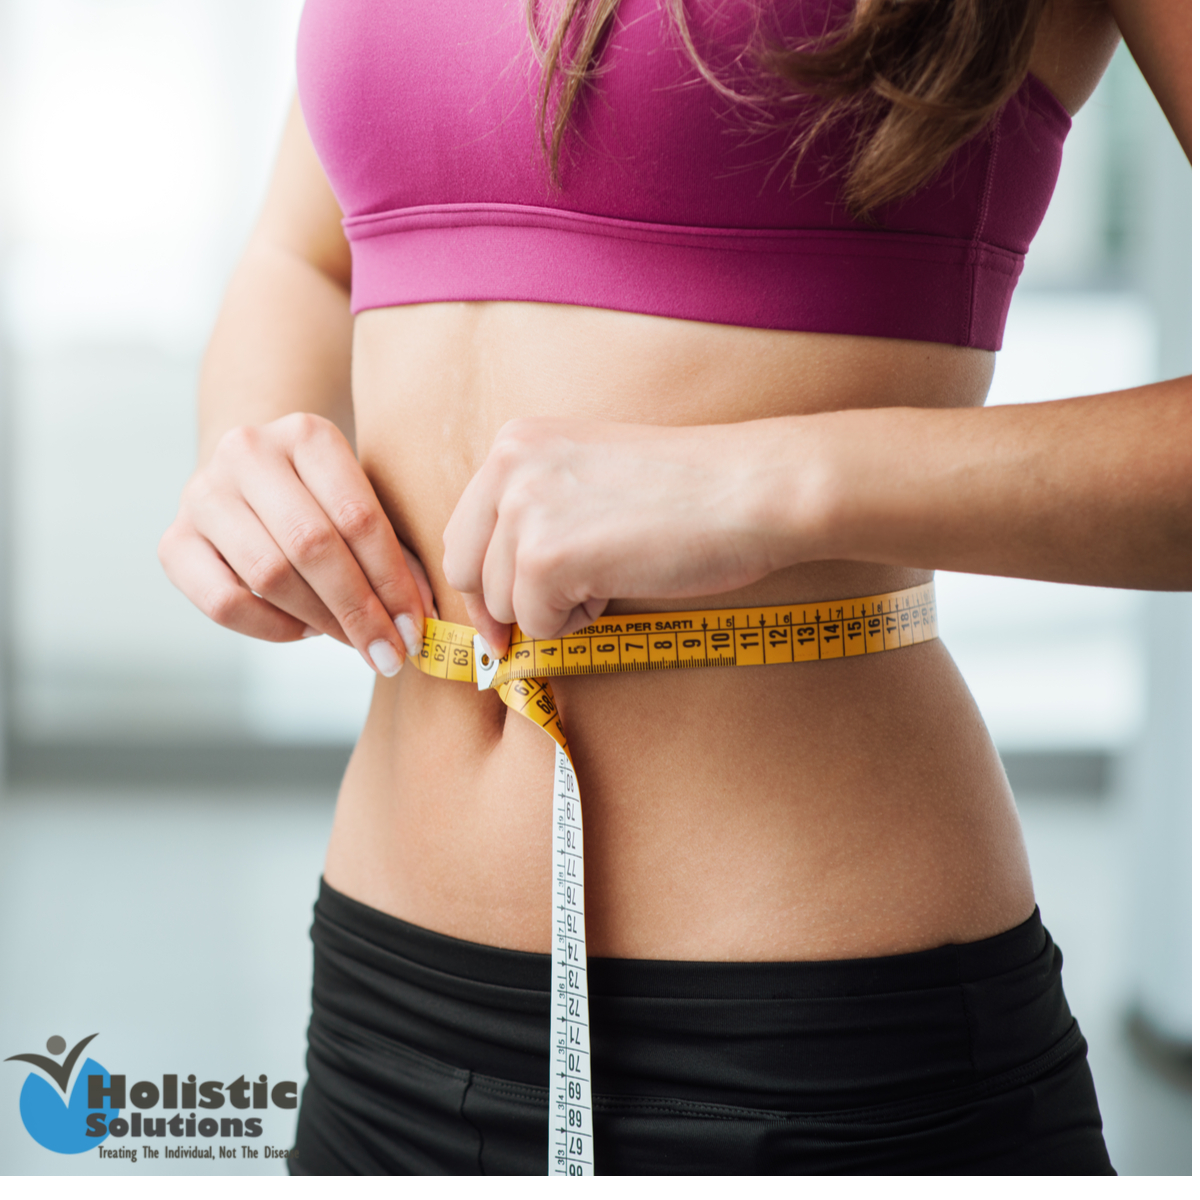 Can Peptides Really Help With Weight Loss?